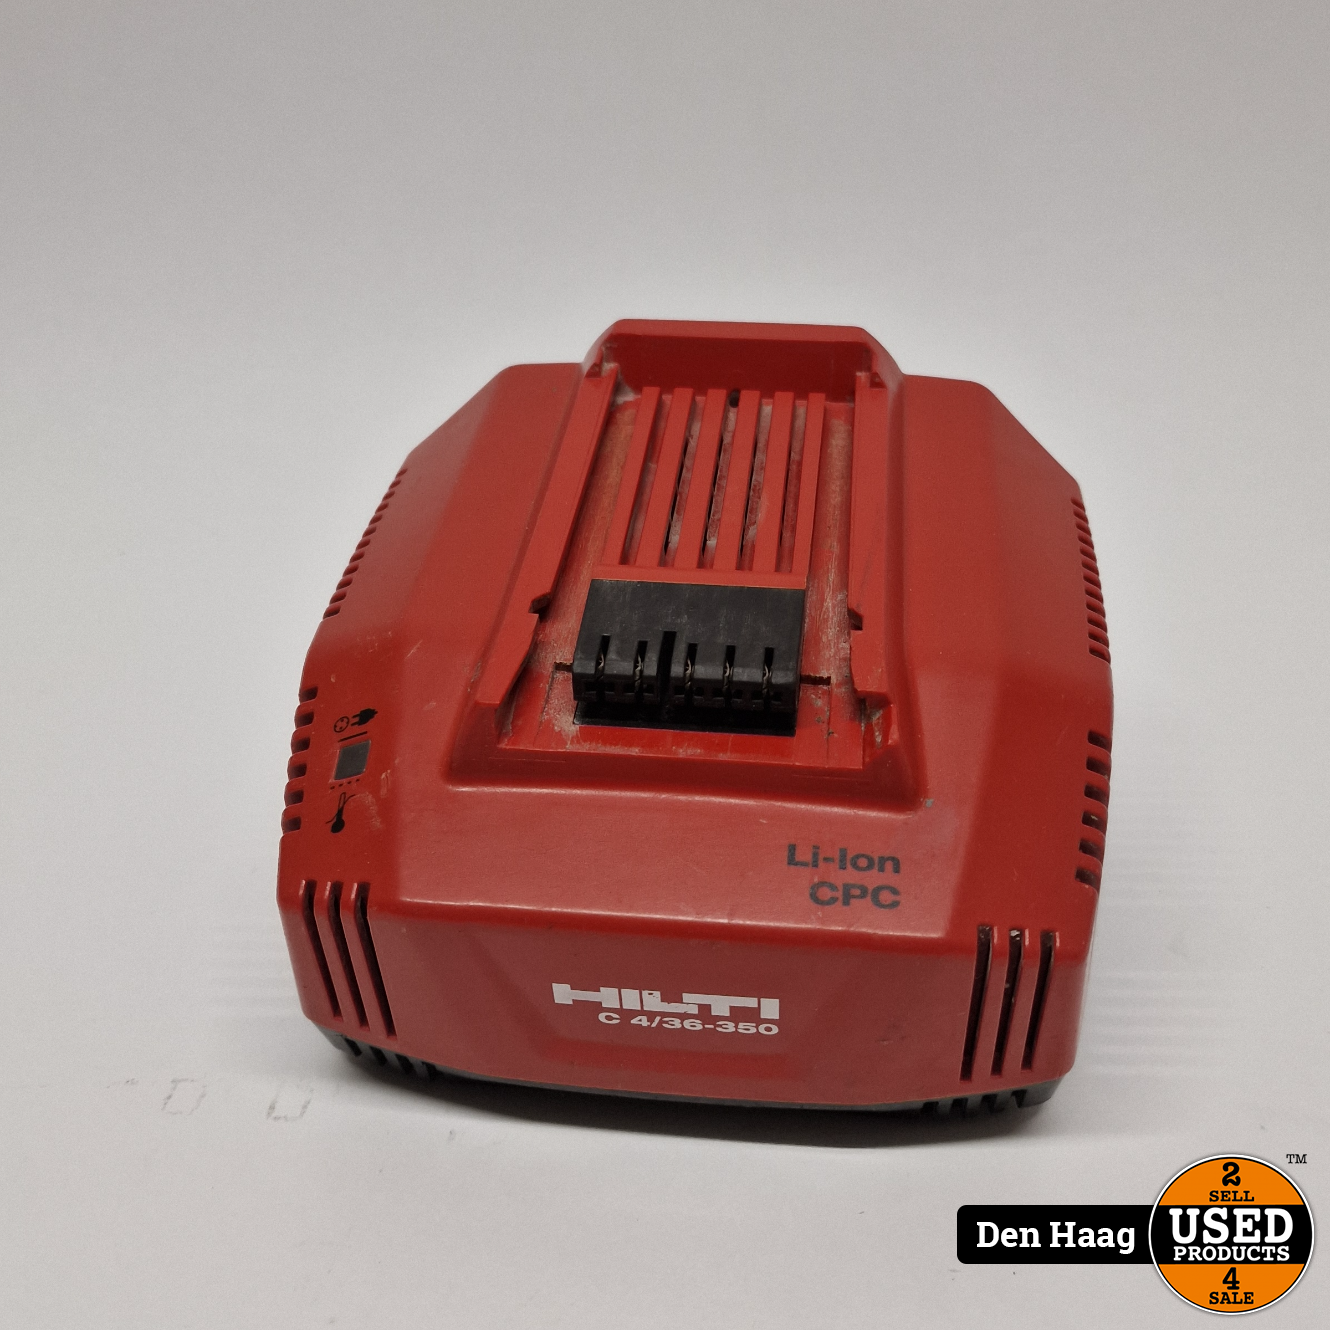 Bier taal browser HILTI C4/36-350 Acculader | Nette staat - Used Products Den Haag